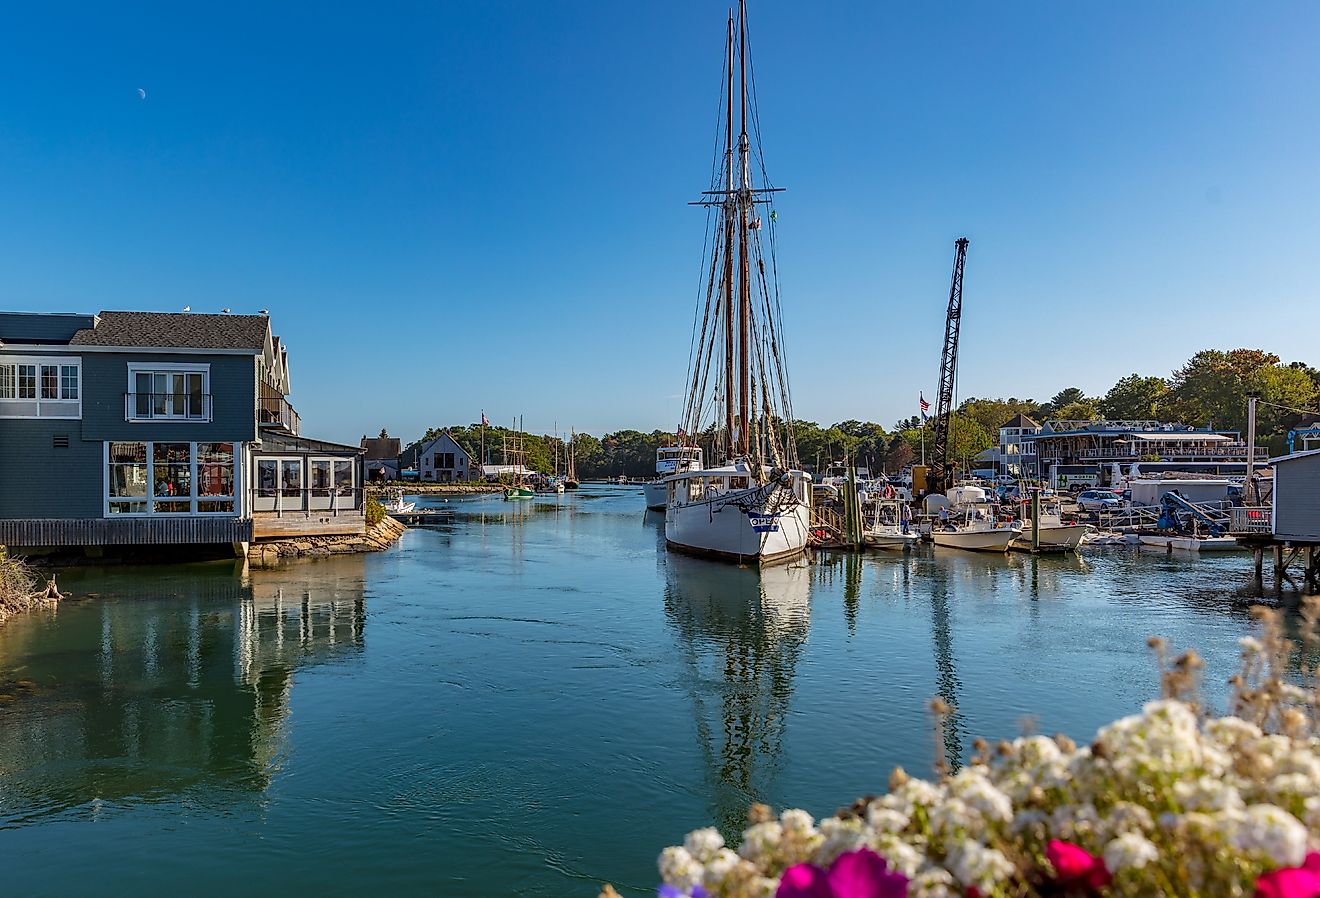 Boats and homes along the water with flowers blooming in Kennebunkport, Maine.